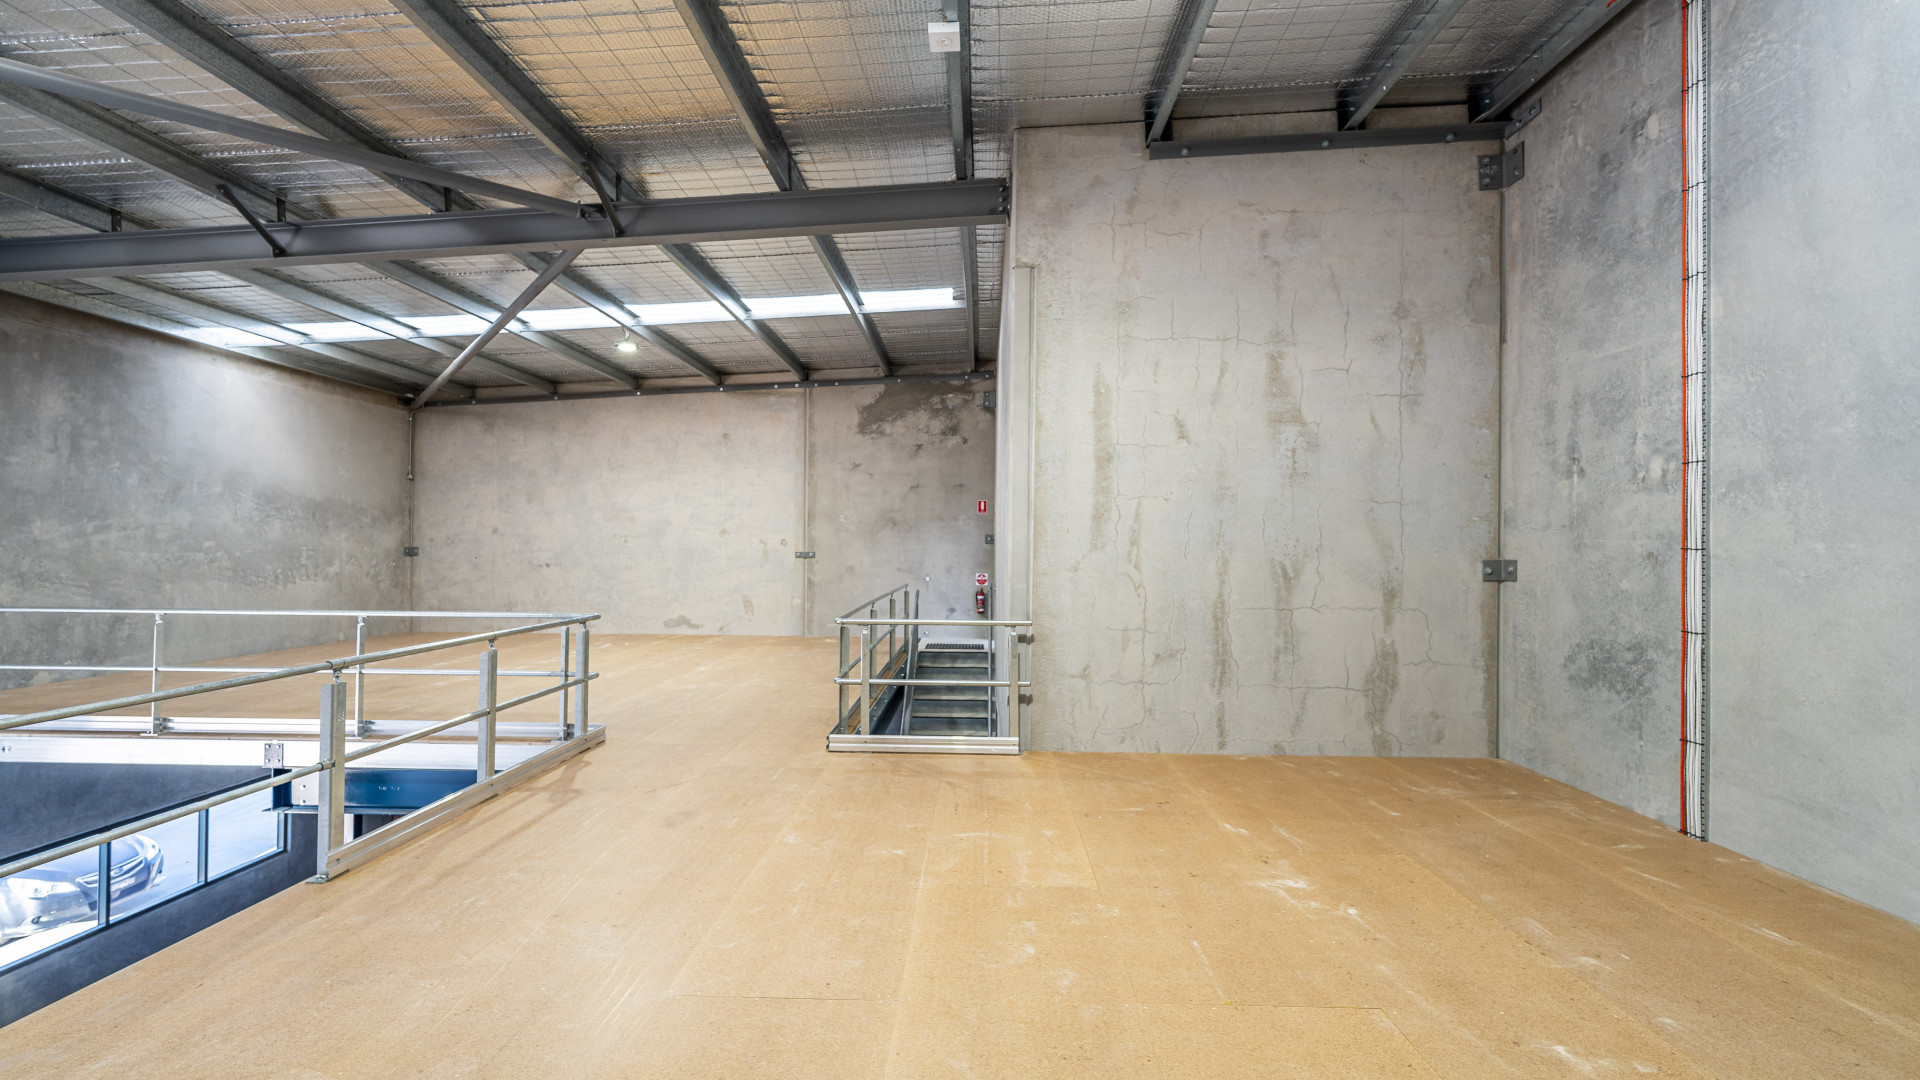 Best Practise for Minimising Hazards in Warehouses with Mezzanine Systems